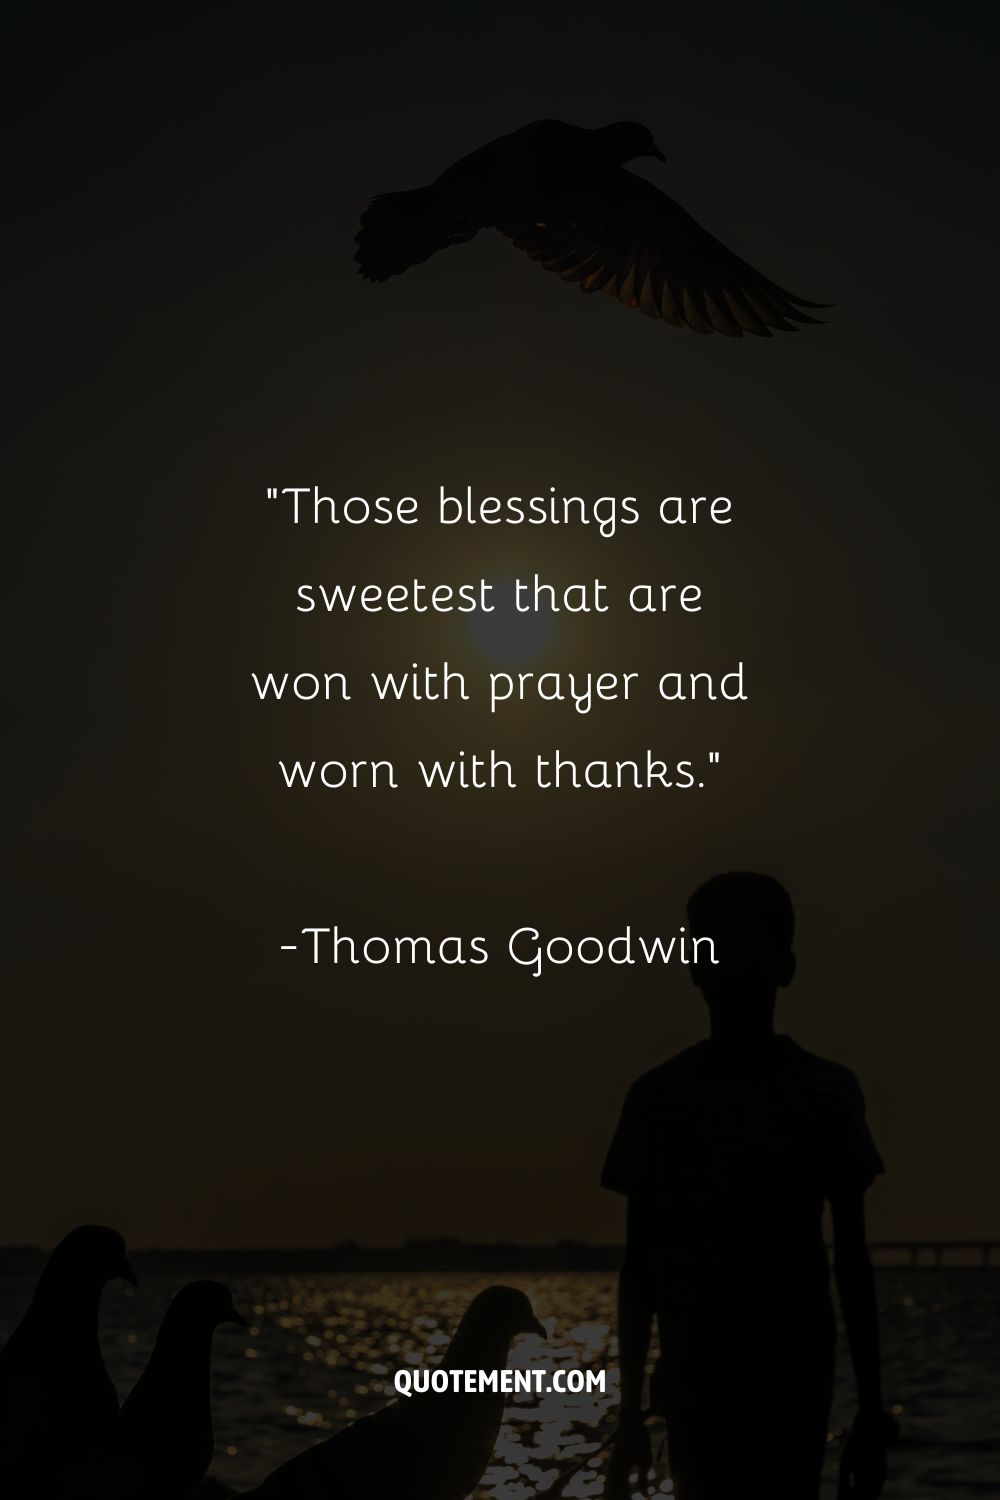 “Those blessings are sweetest that are won with prayer and worn with thanks.”